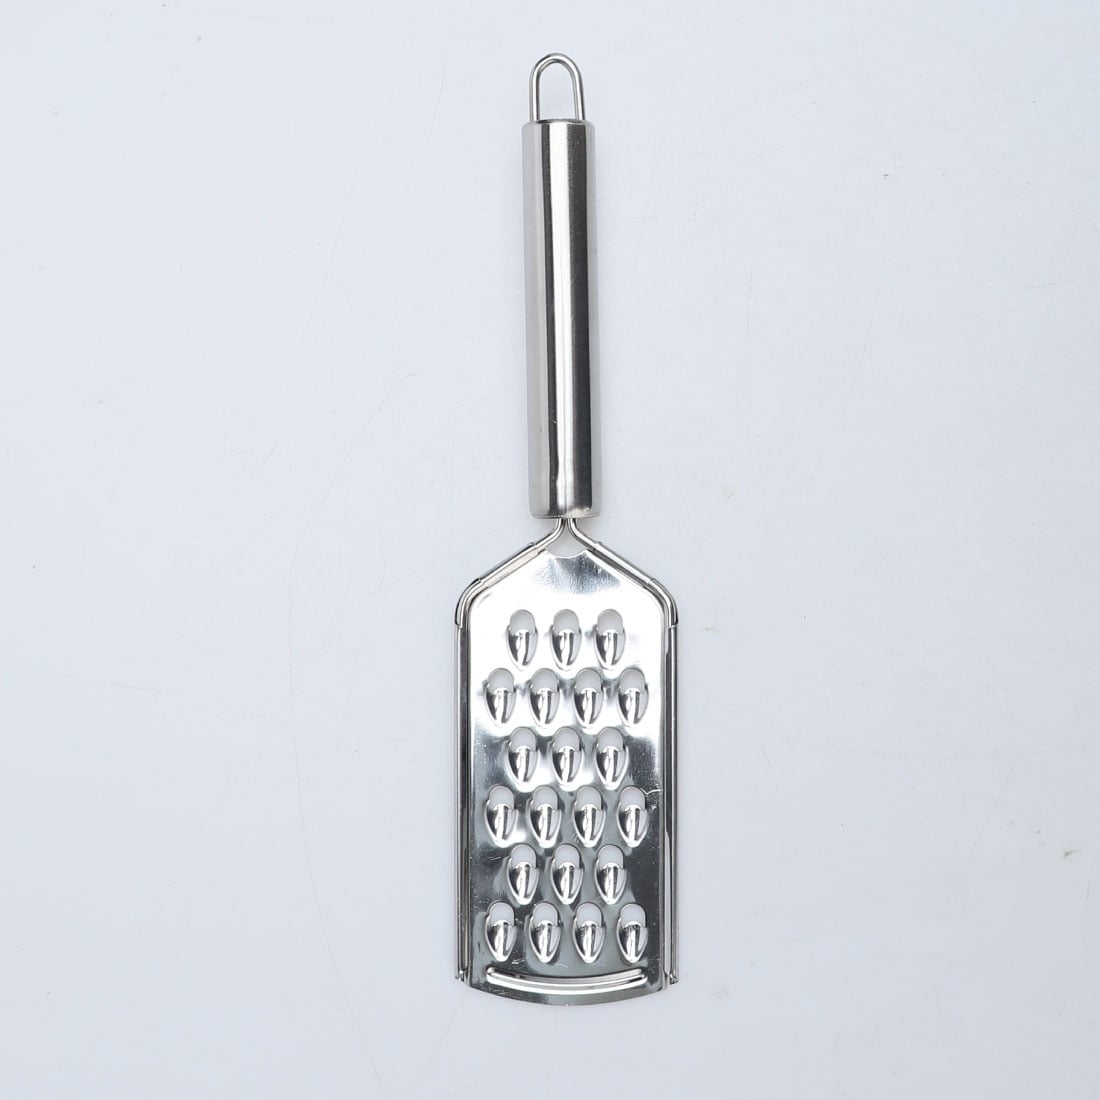 https://ak1.ostkcdn.com/images/products/is/images/direct/6dddf1a8e1920805e6c8401e001da12f09ea6996/Stainless-Steel-Cheese-Grater-Fruit-Flat-Vegetable-Grater-for-Restaurant.jpg